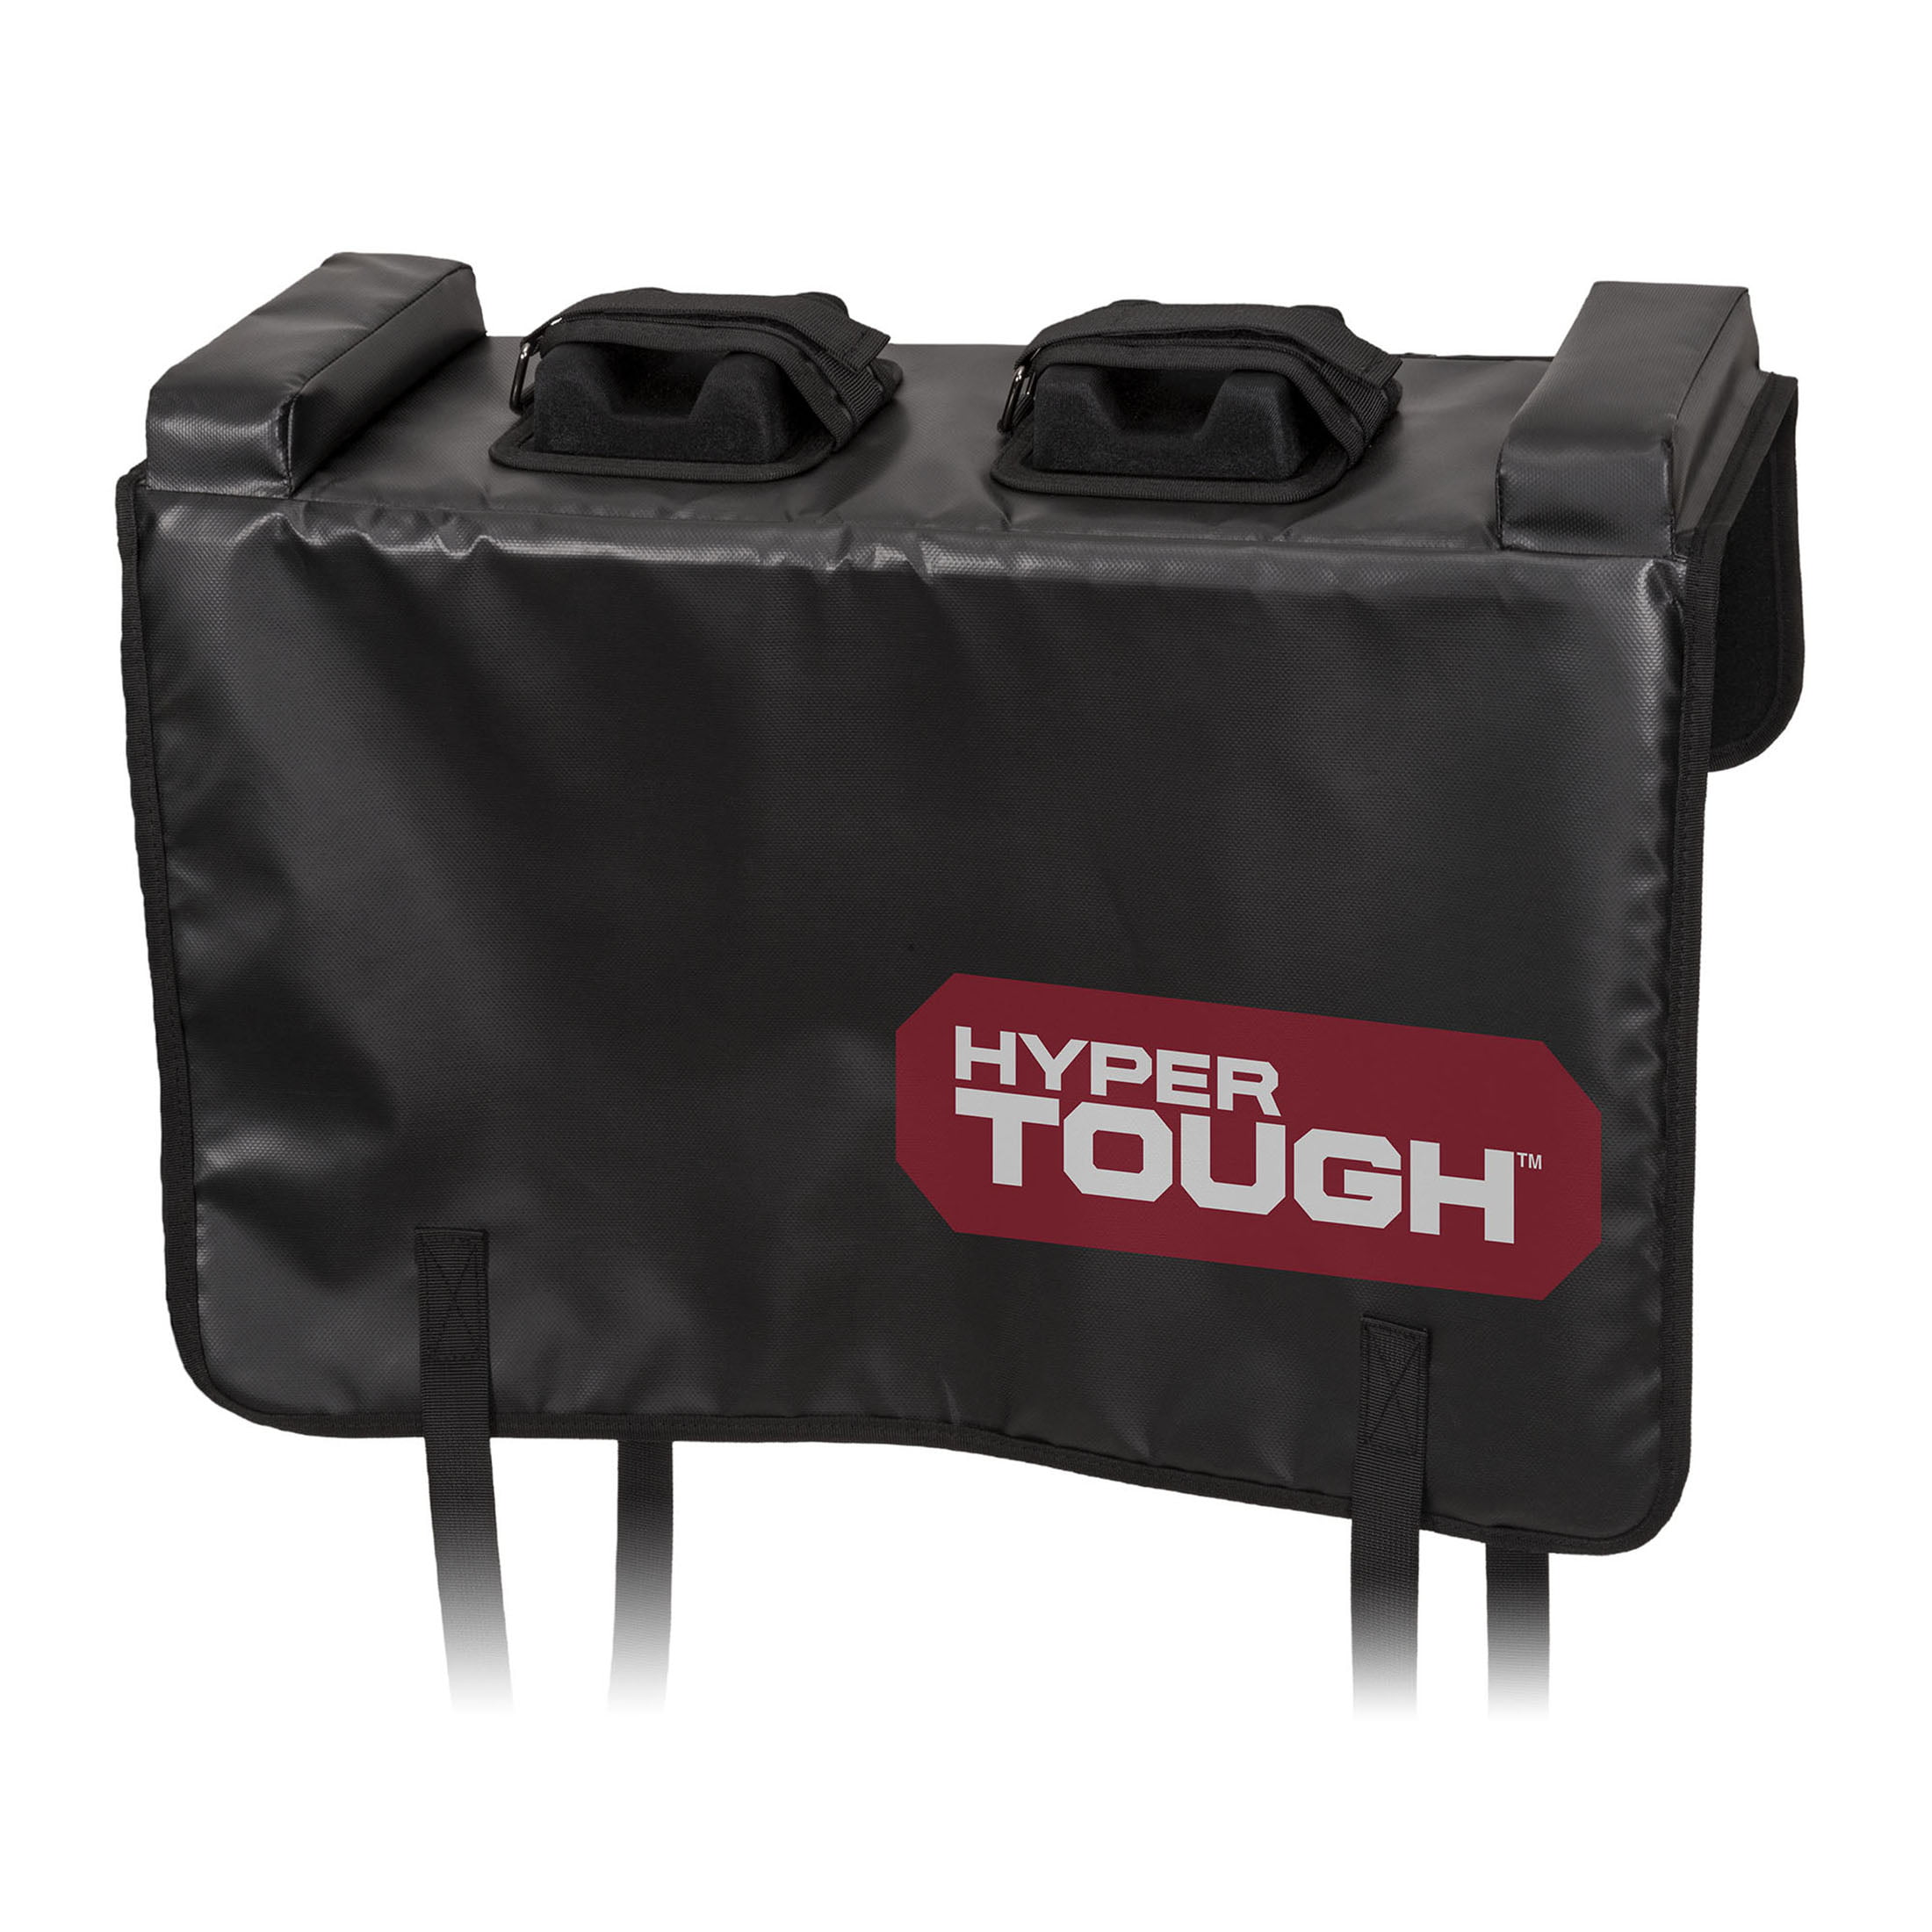 Hyper Tough Tailgate Bike Rack Carrier Protection Pad for 2 Bikes (Any Size Truck Tailgate) $10 + Free S&H w/ Walmart+ or on $35+